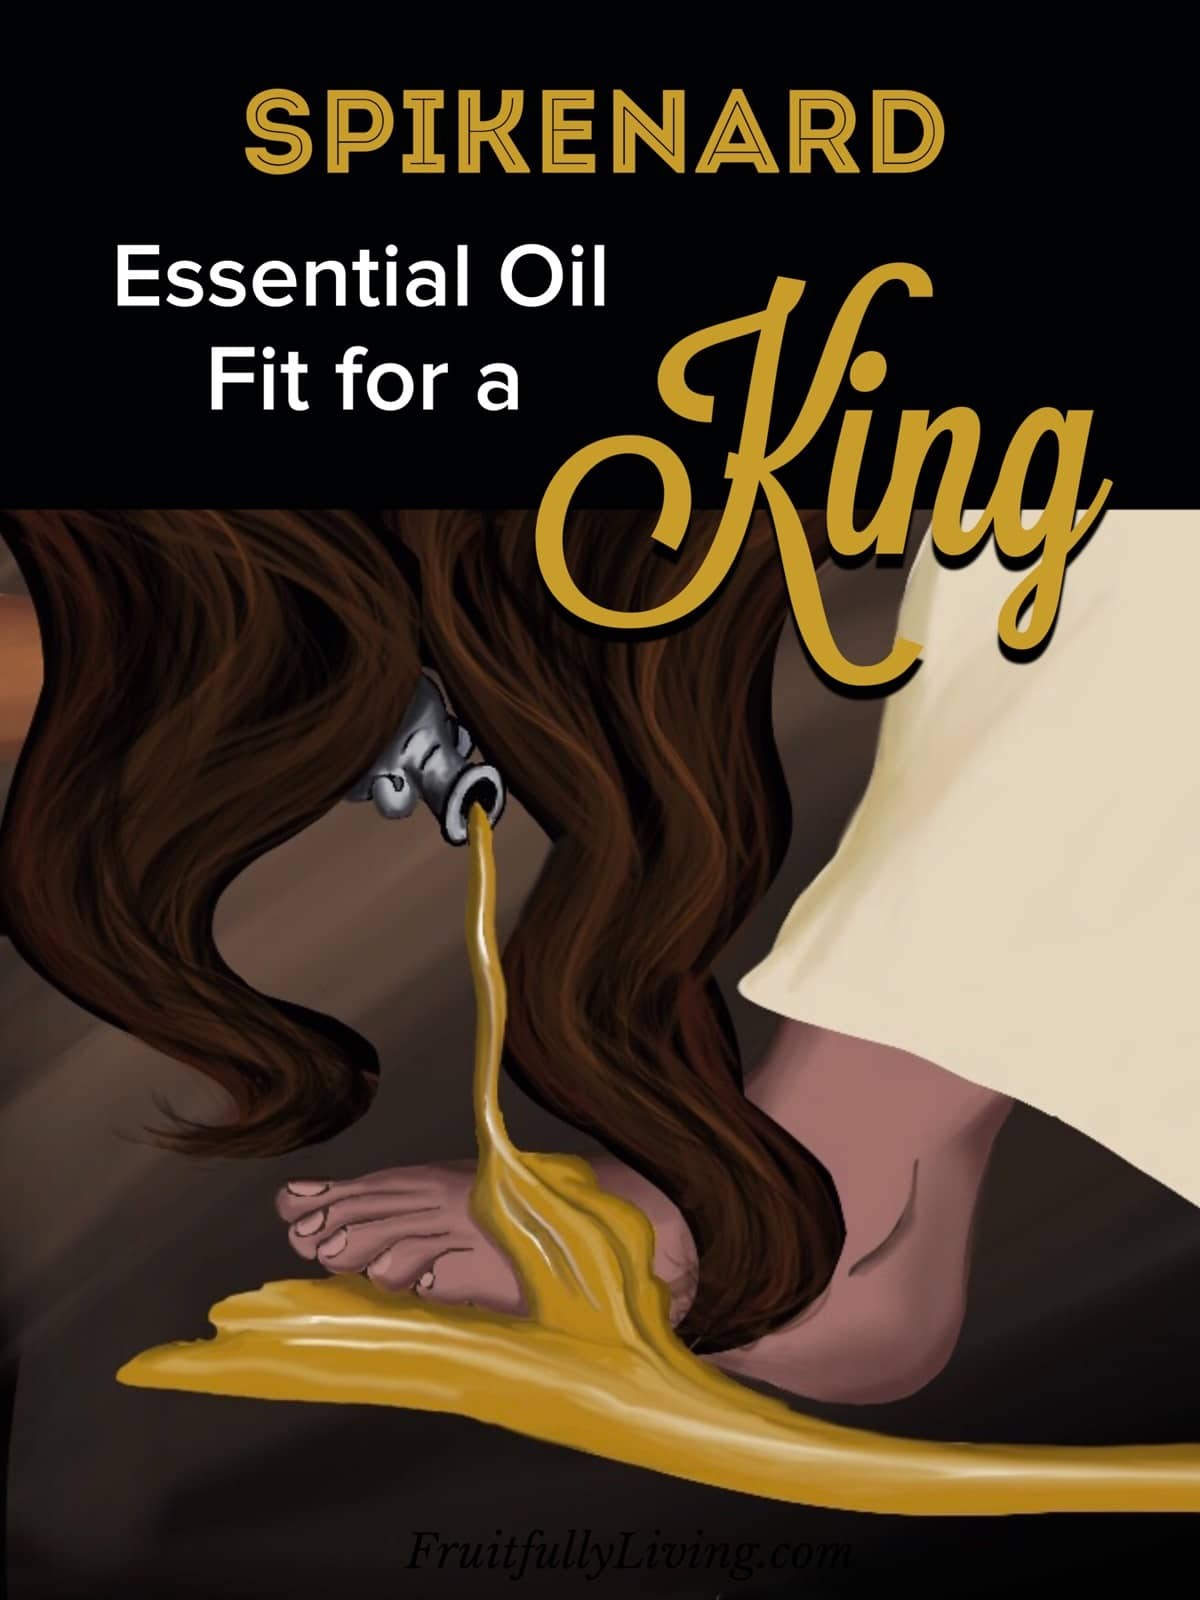 You are currently viewing Mary of Bethany and an Essential Oil Fit for a King!